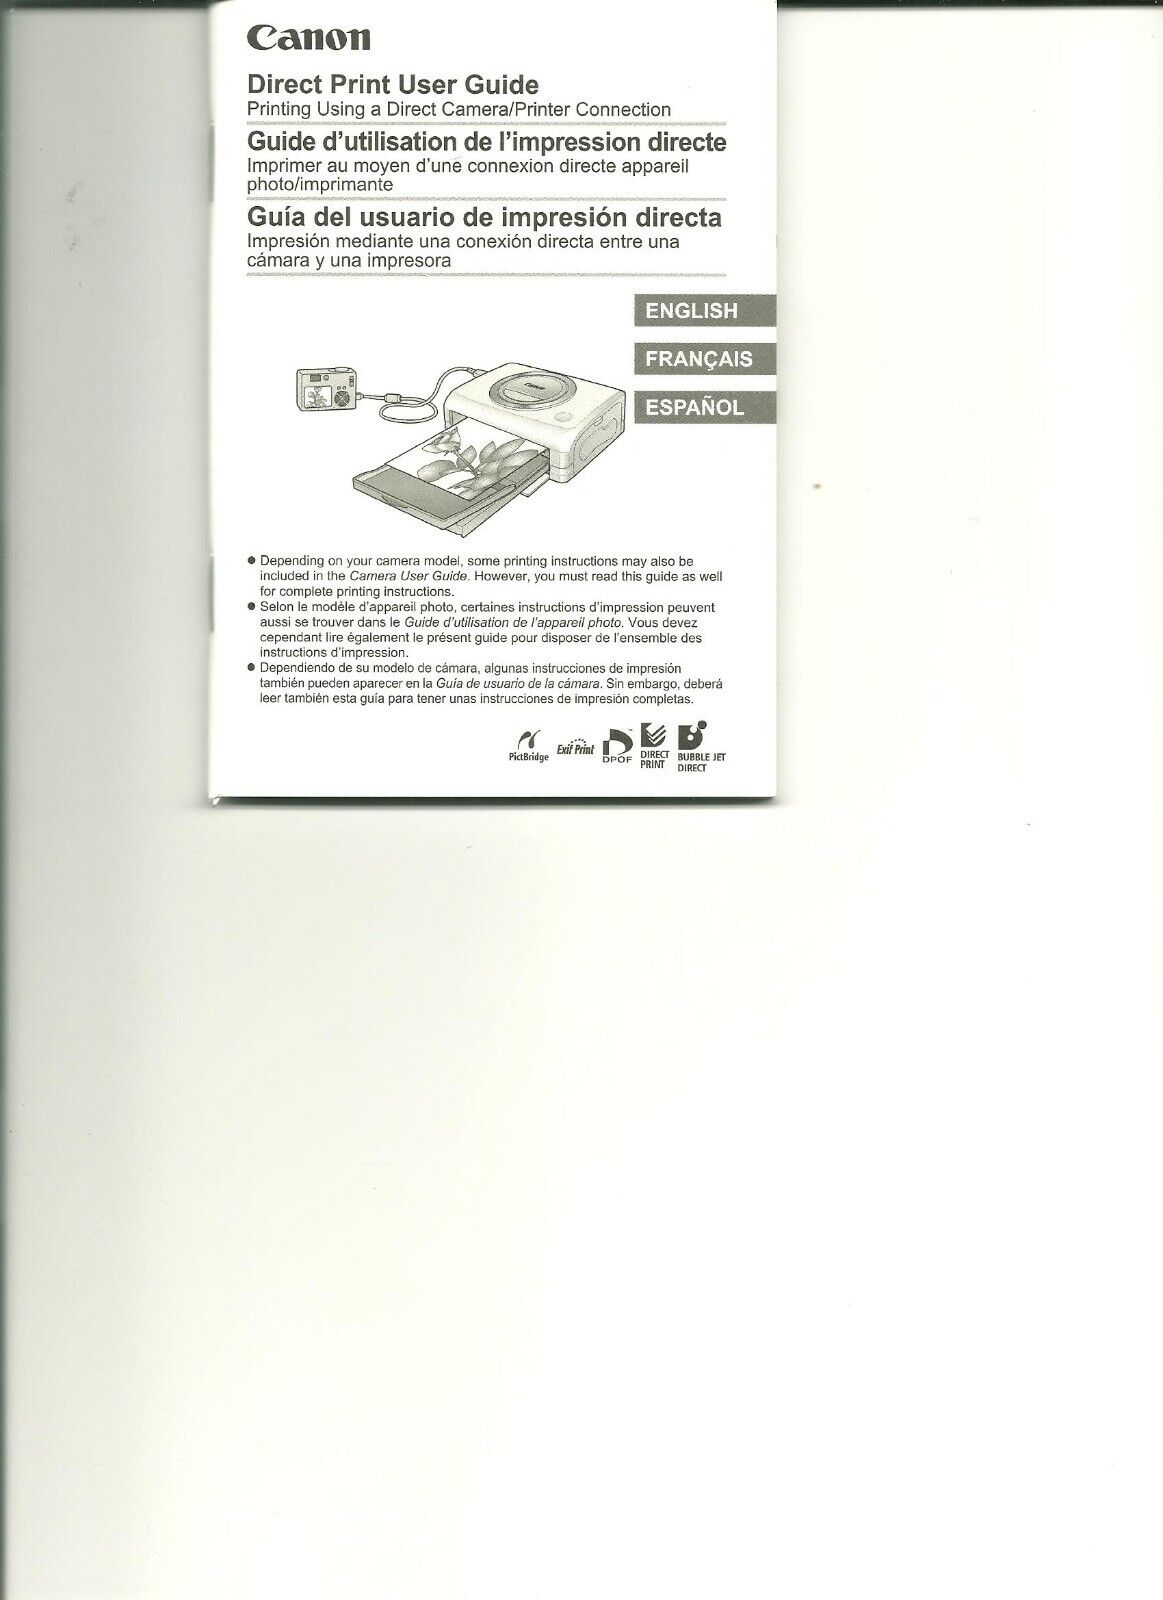 New Canon Direct Print User Guide 2004 Instruction Manual